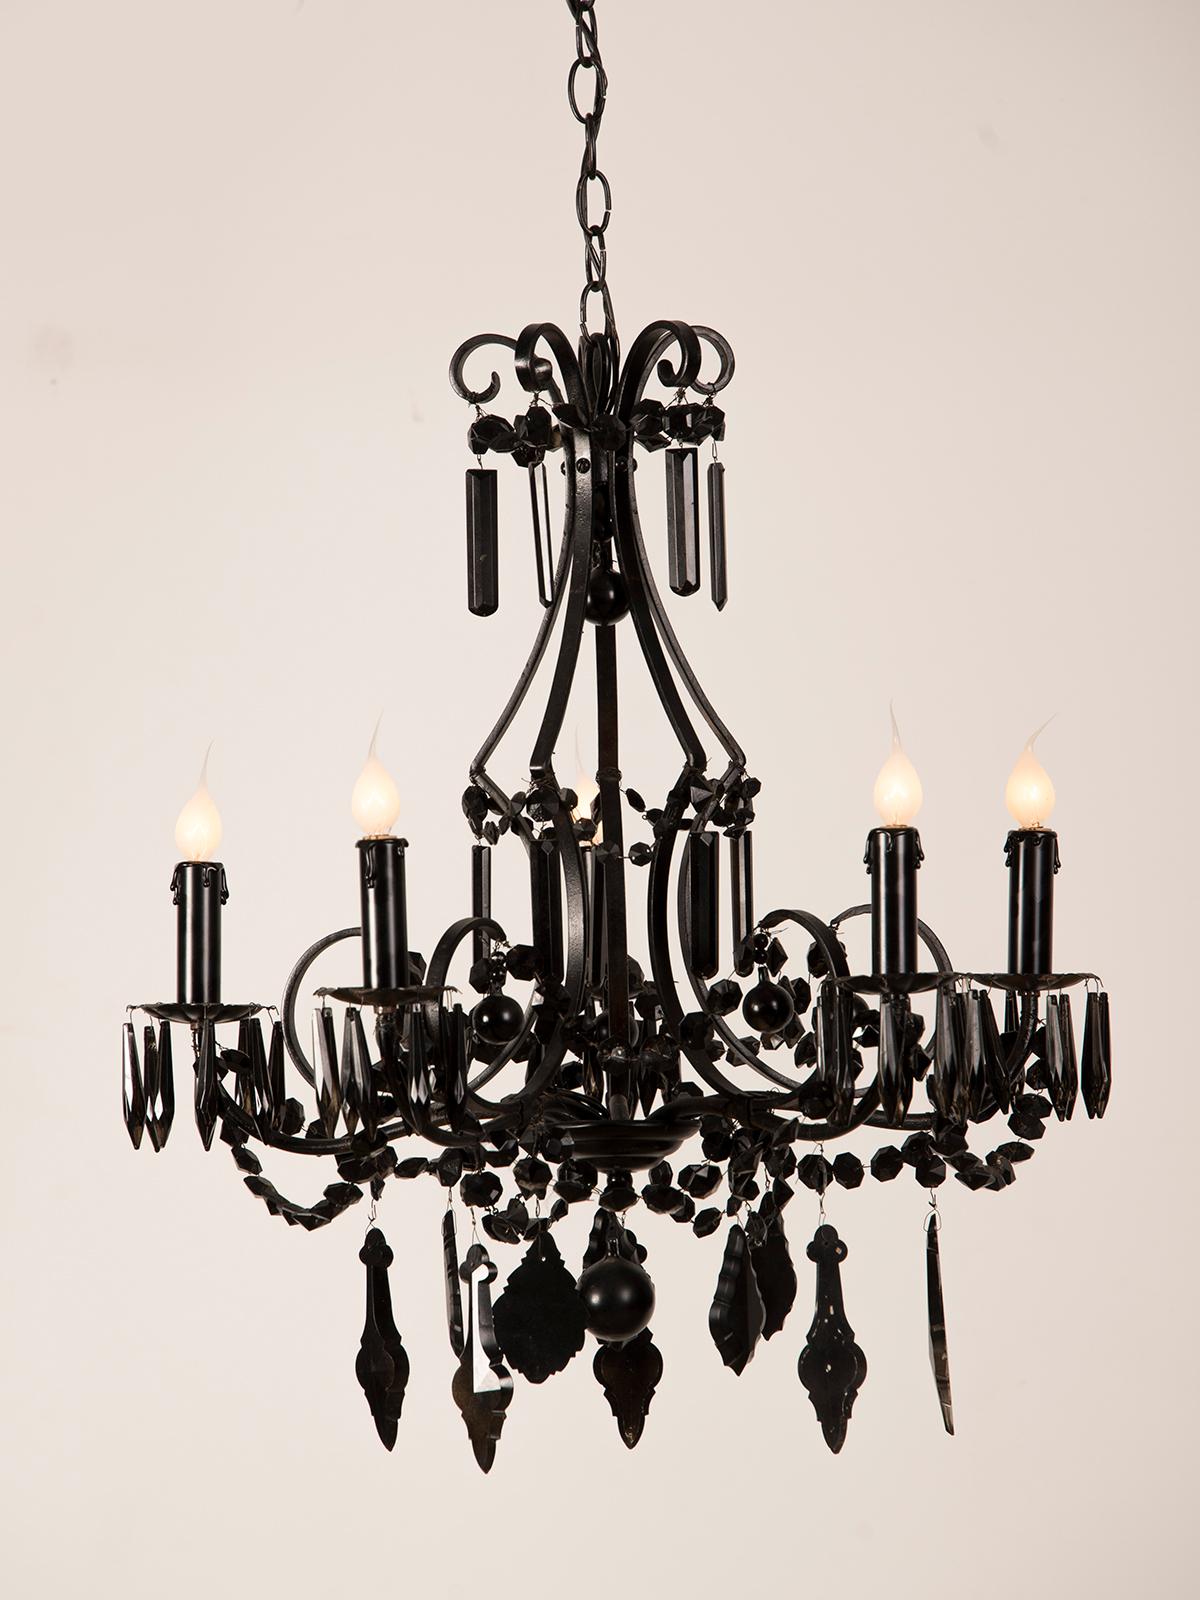 A stylish vintage French five-arm chandelier with the entire cage, crystal drops and beading painted black to resemble black crystal from France, circa 1940. The vintage crystal chandelier has timeless and Classic appeal but the conversion from